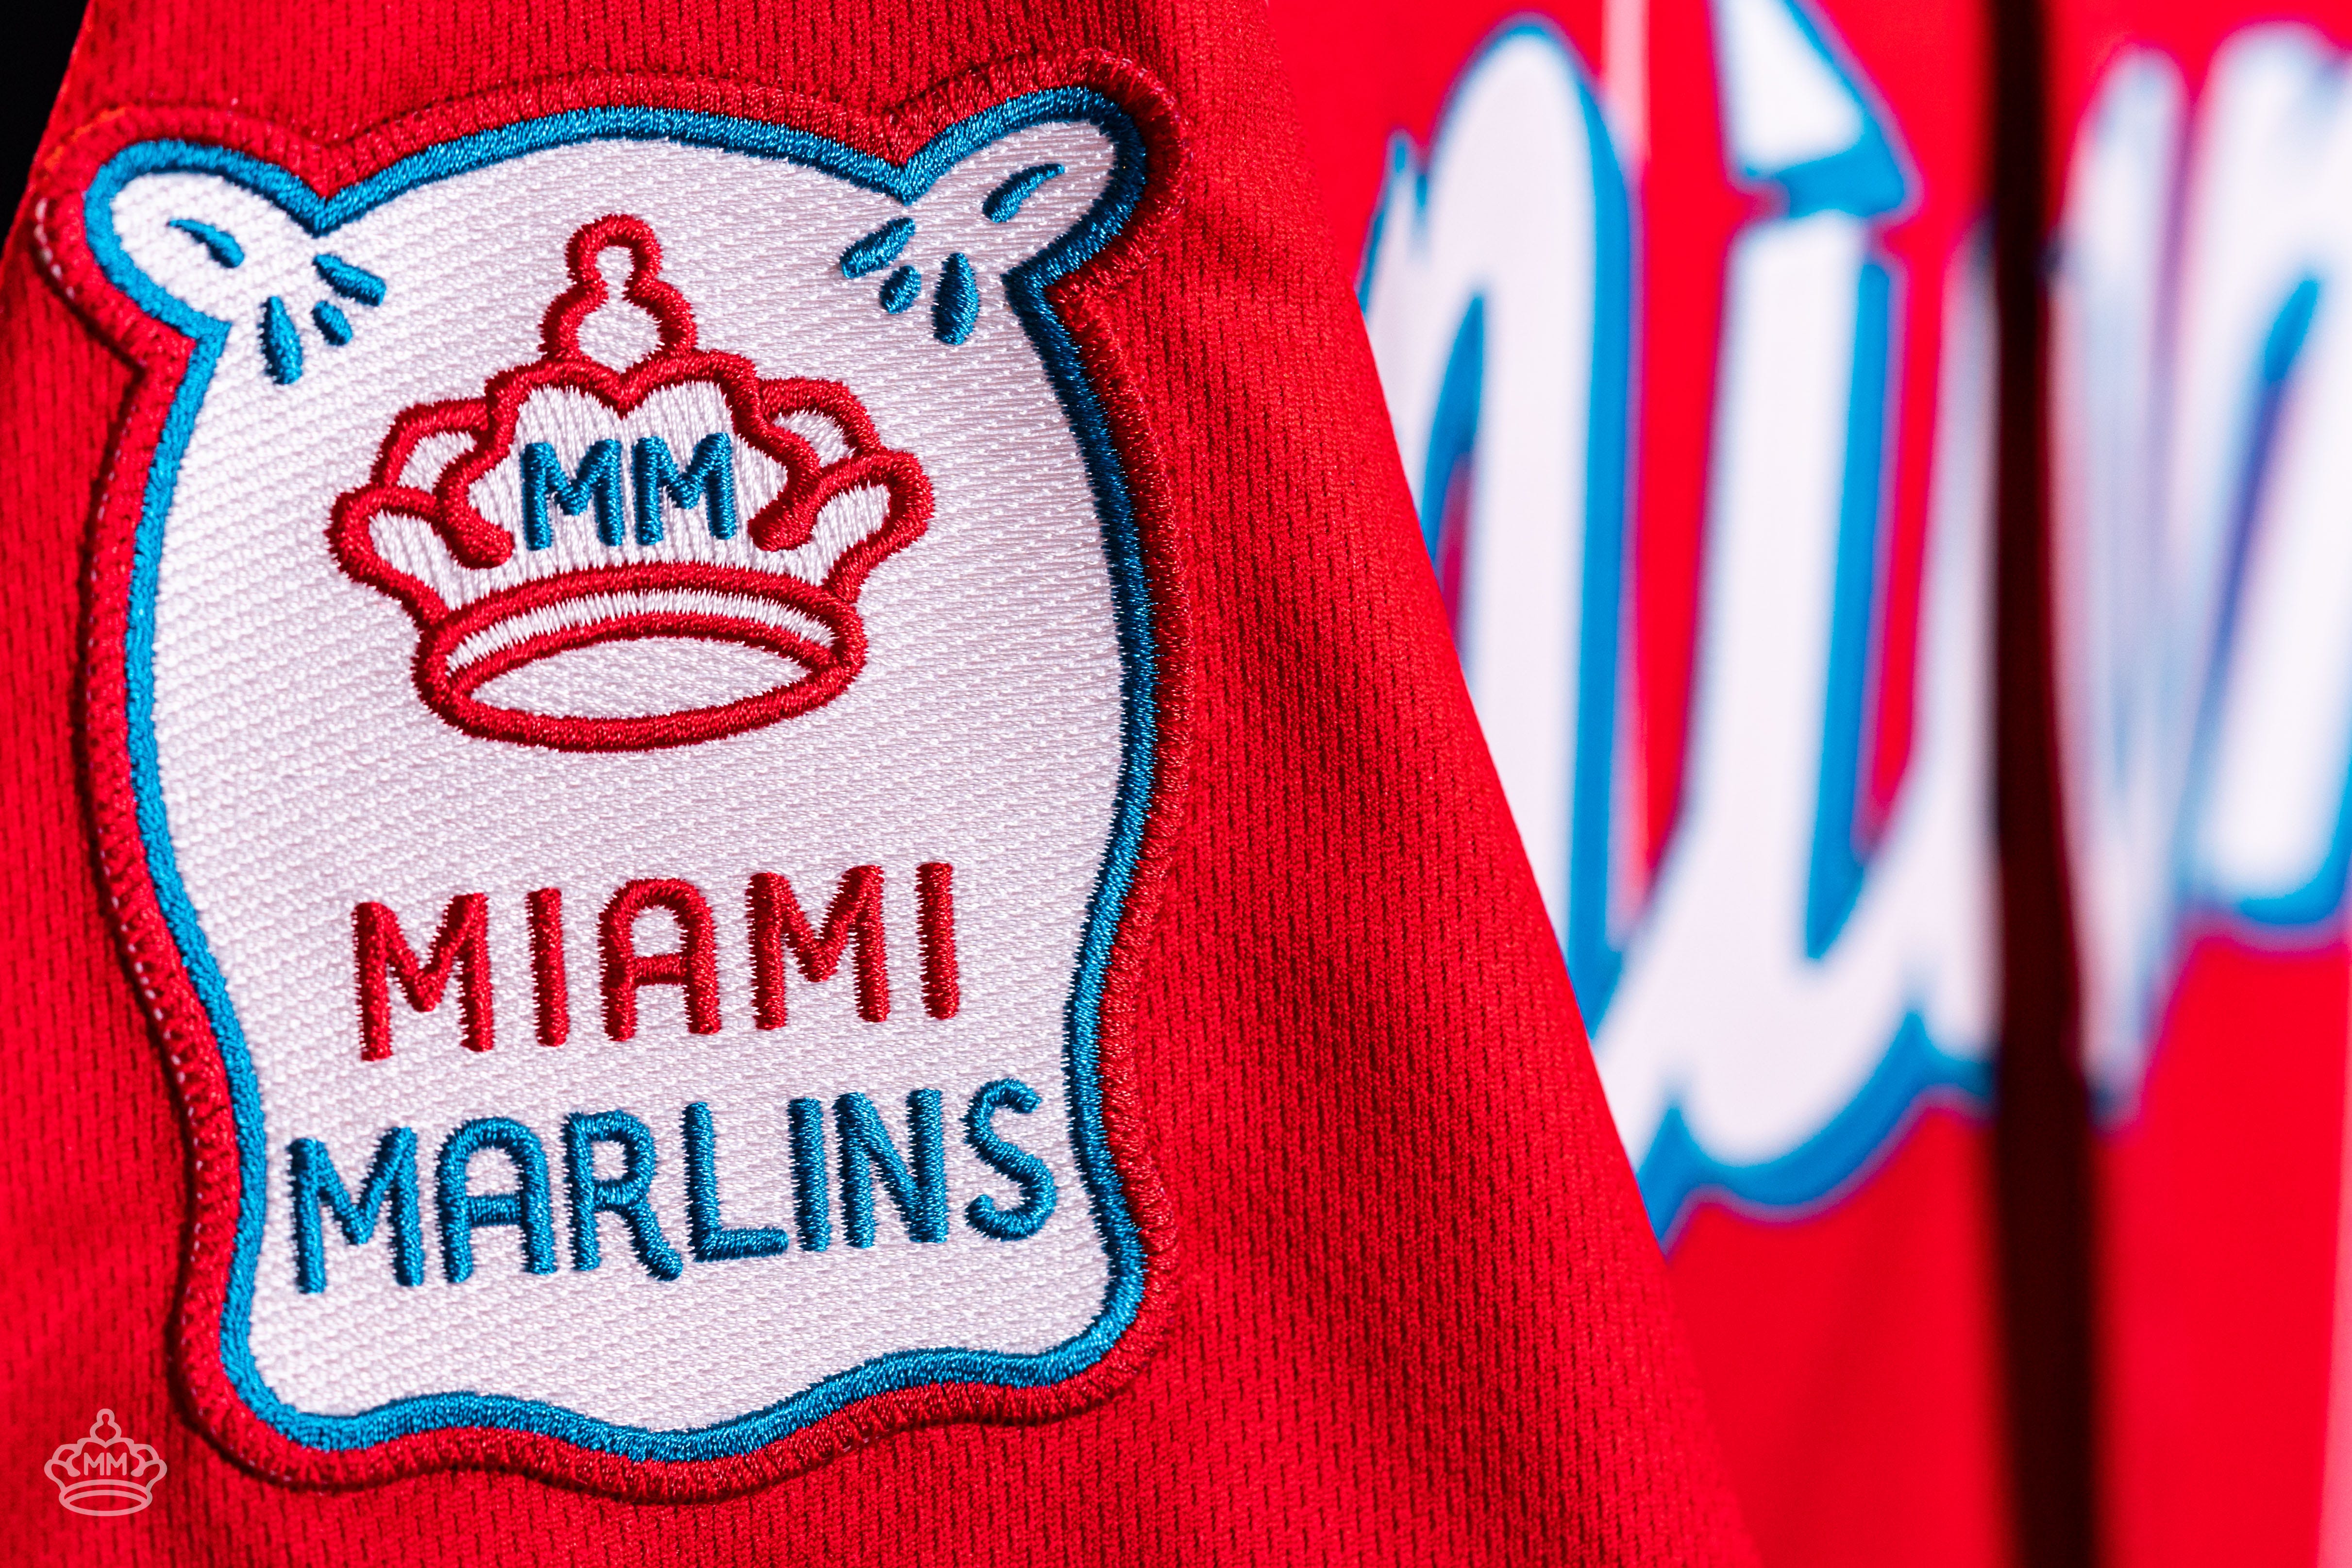 Miami Marlins unveil red jerseys, inspired by Sugar Kings of Cuba